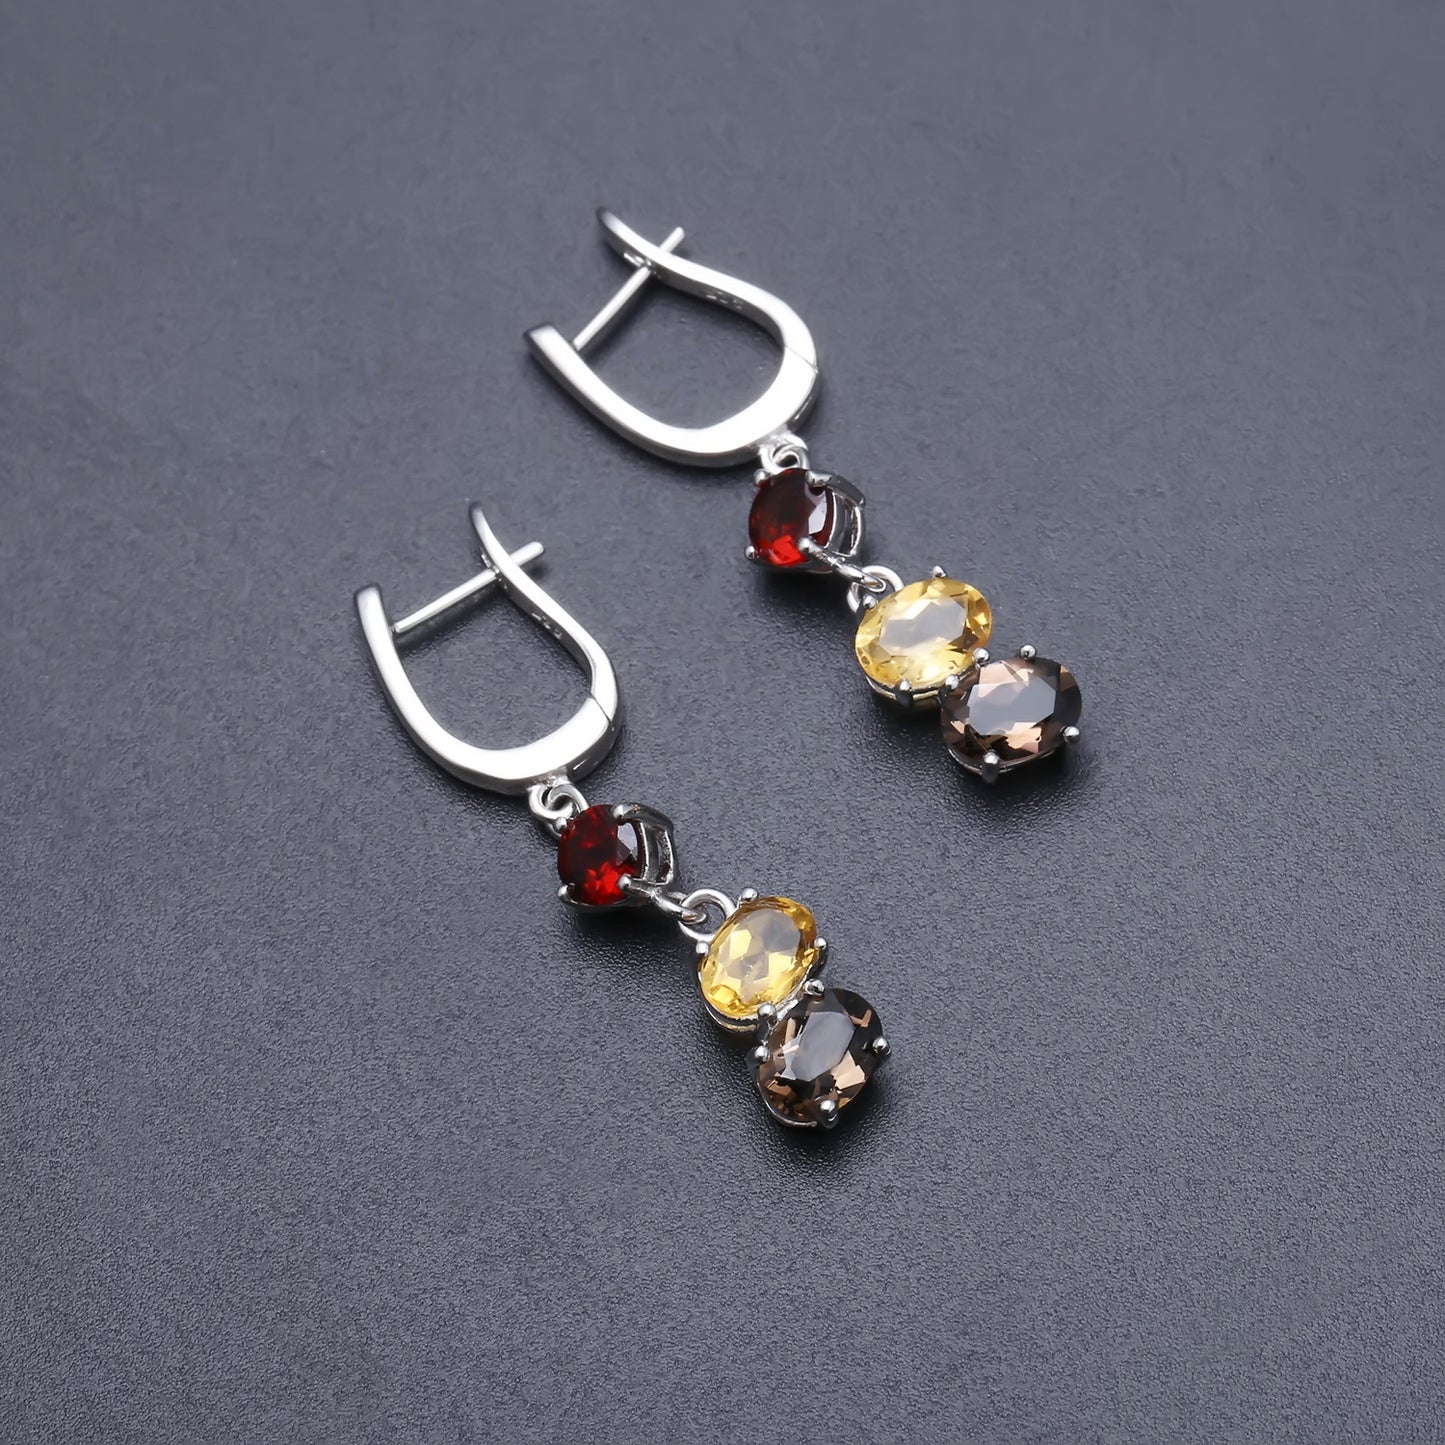 European Natural Colourful Jewelry Beading Sterling Silver Drop Earrings for Women